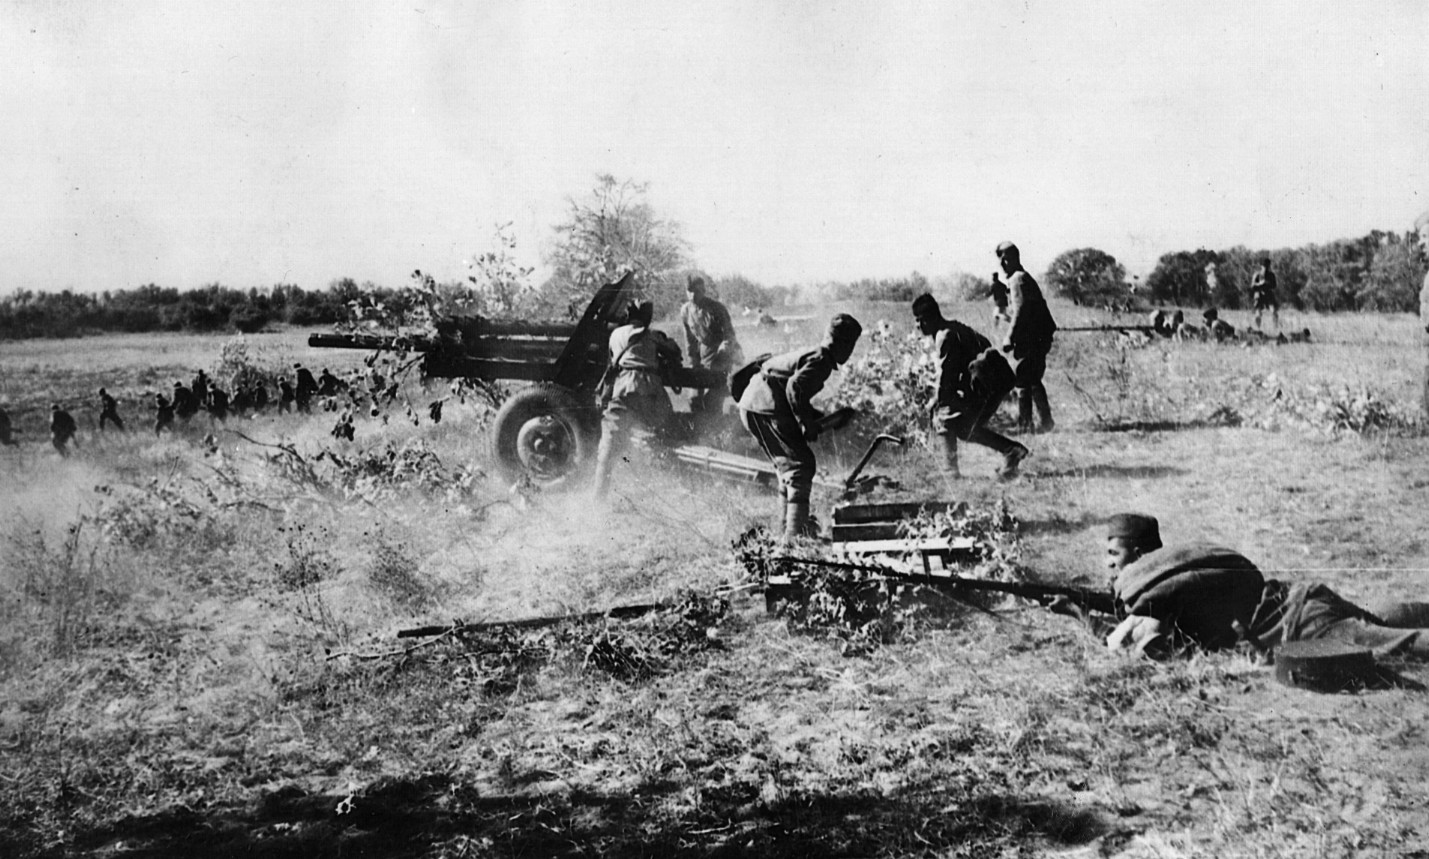 Russian infantry service field artillery and fire small arms at attacking Germans in defense of the Kursk salient.